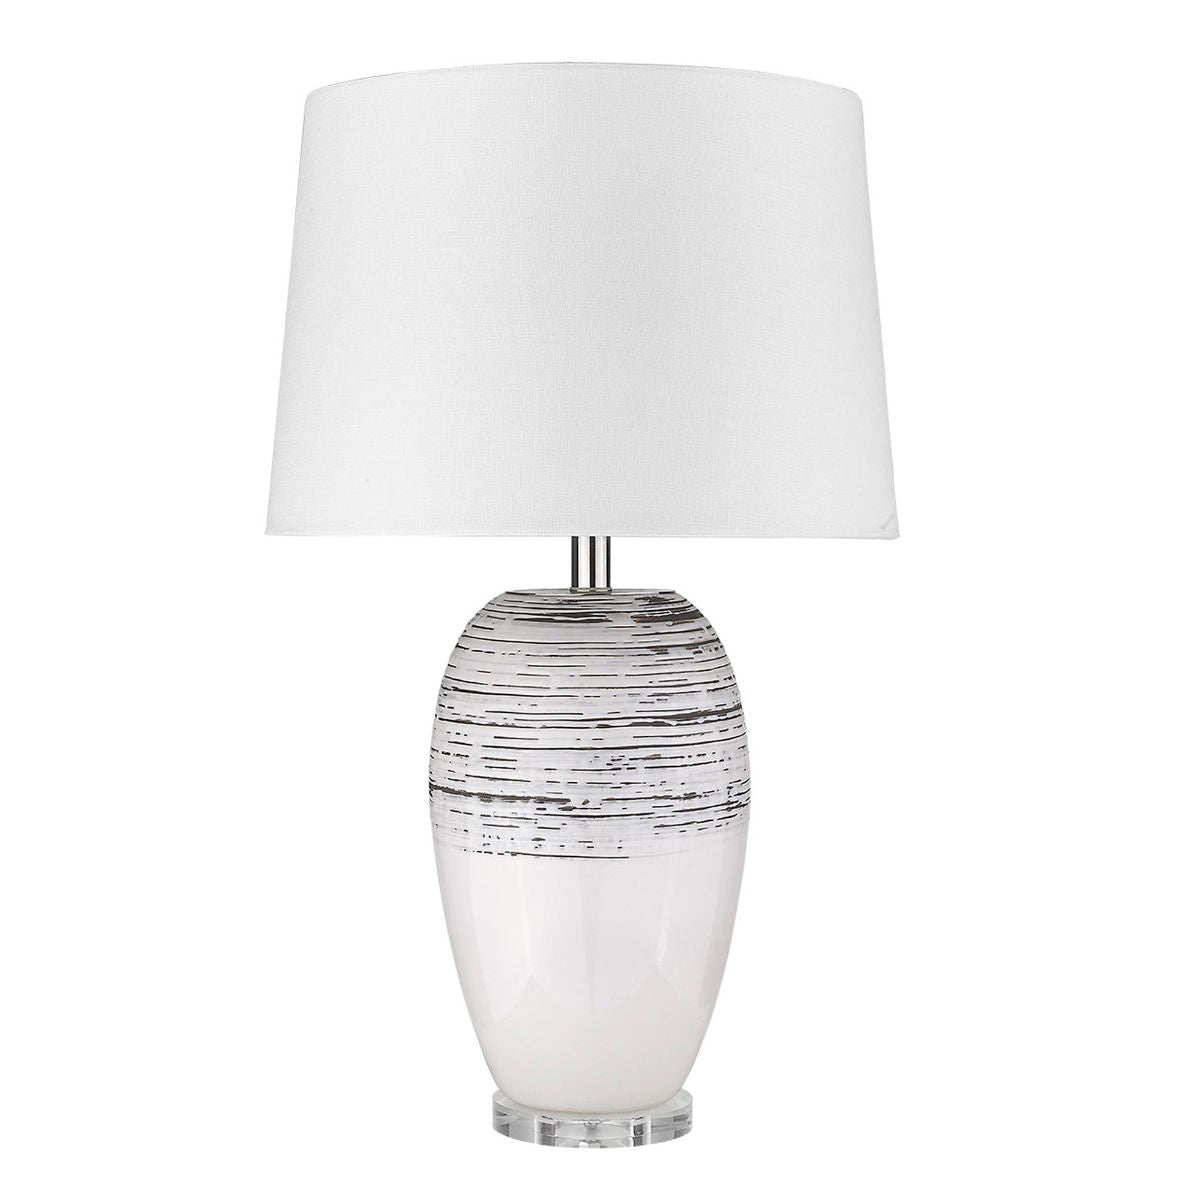 Trend Home 1 Light 27 inches Table Lamp Ceramic Body and Polished Nickel Accents